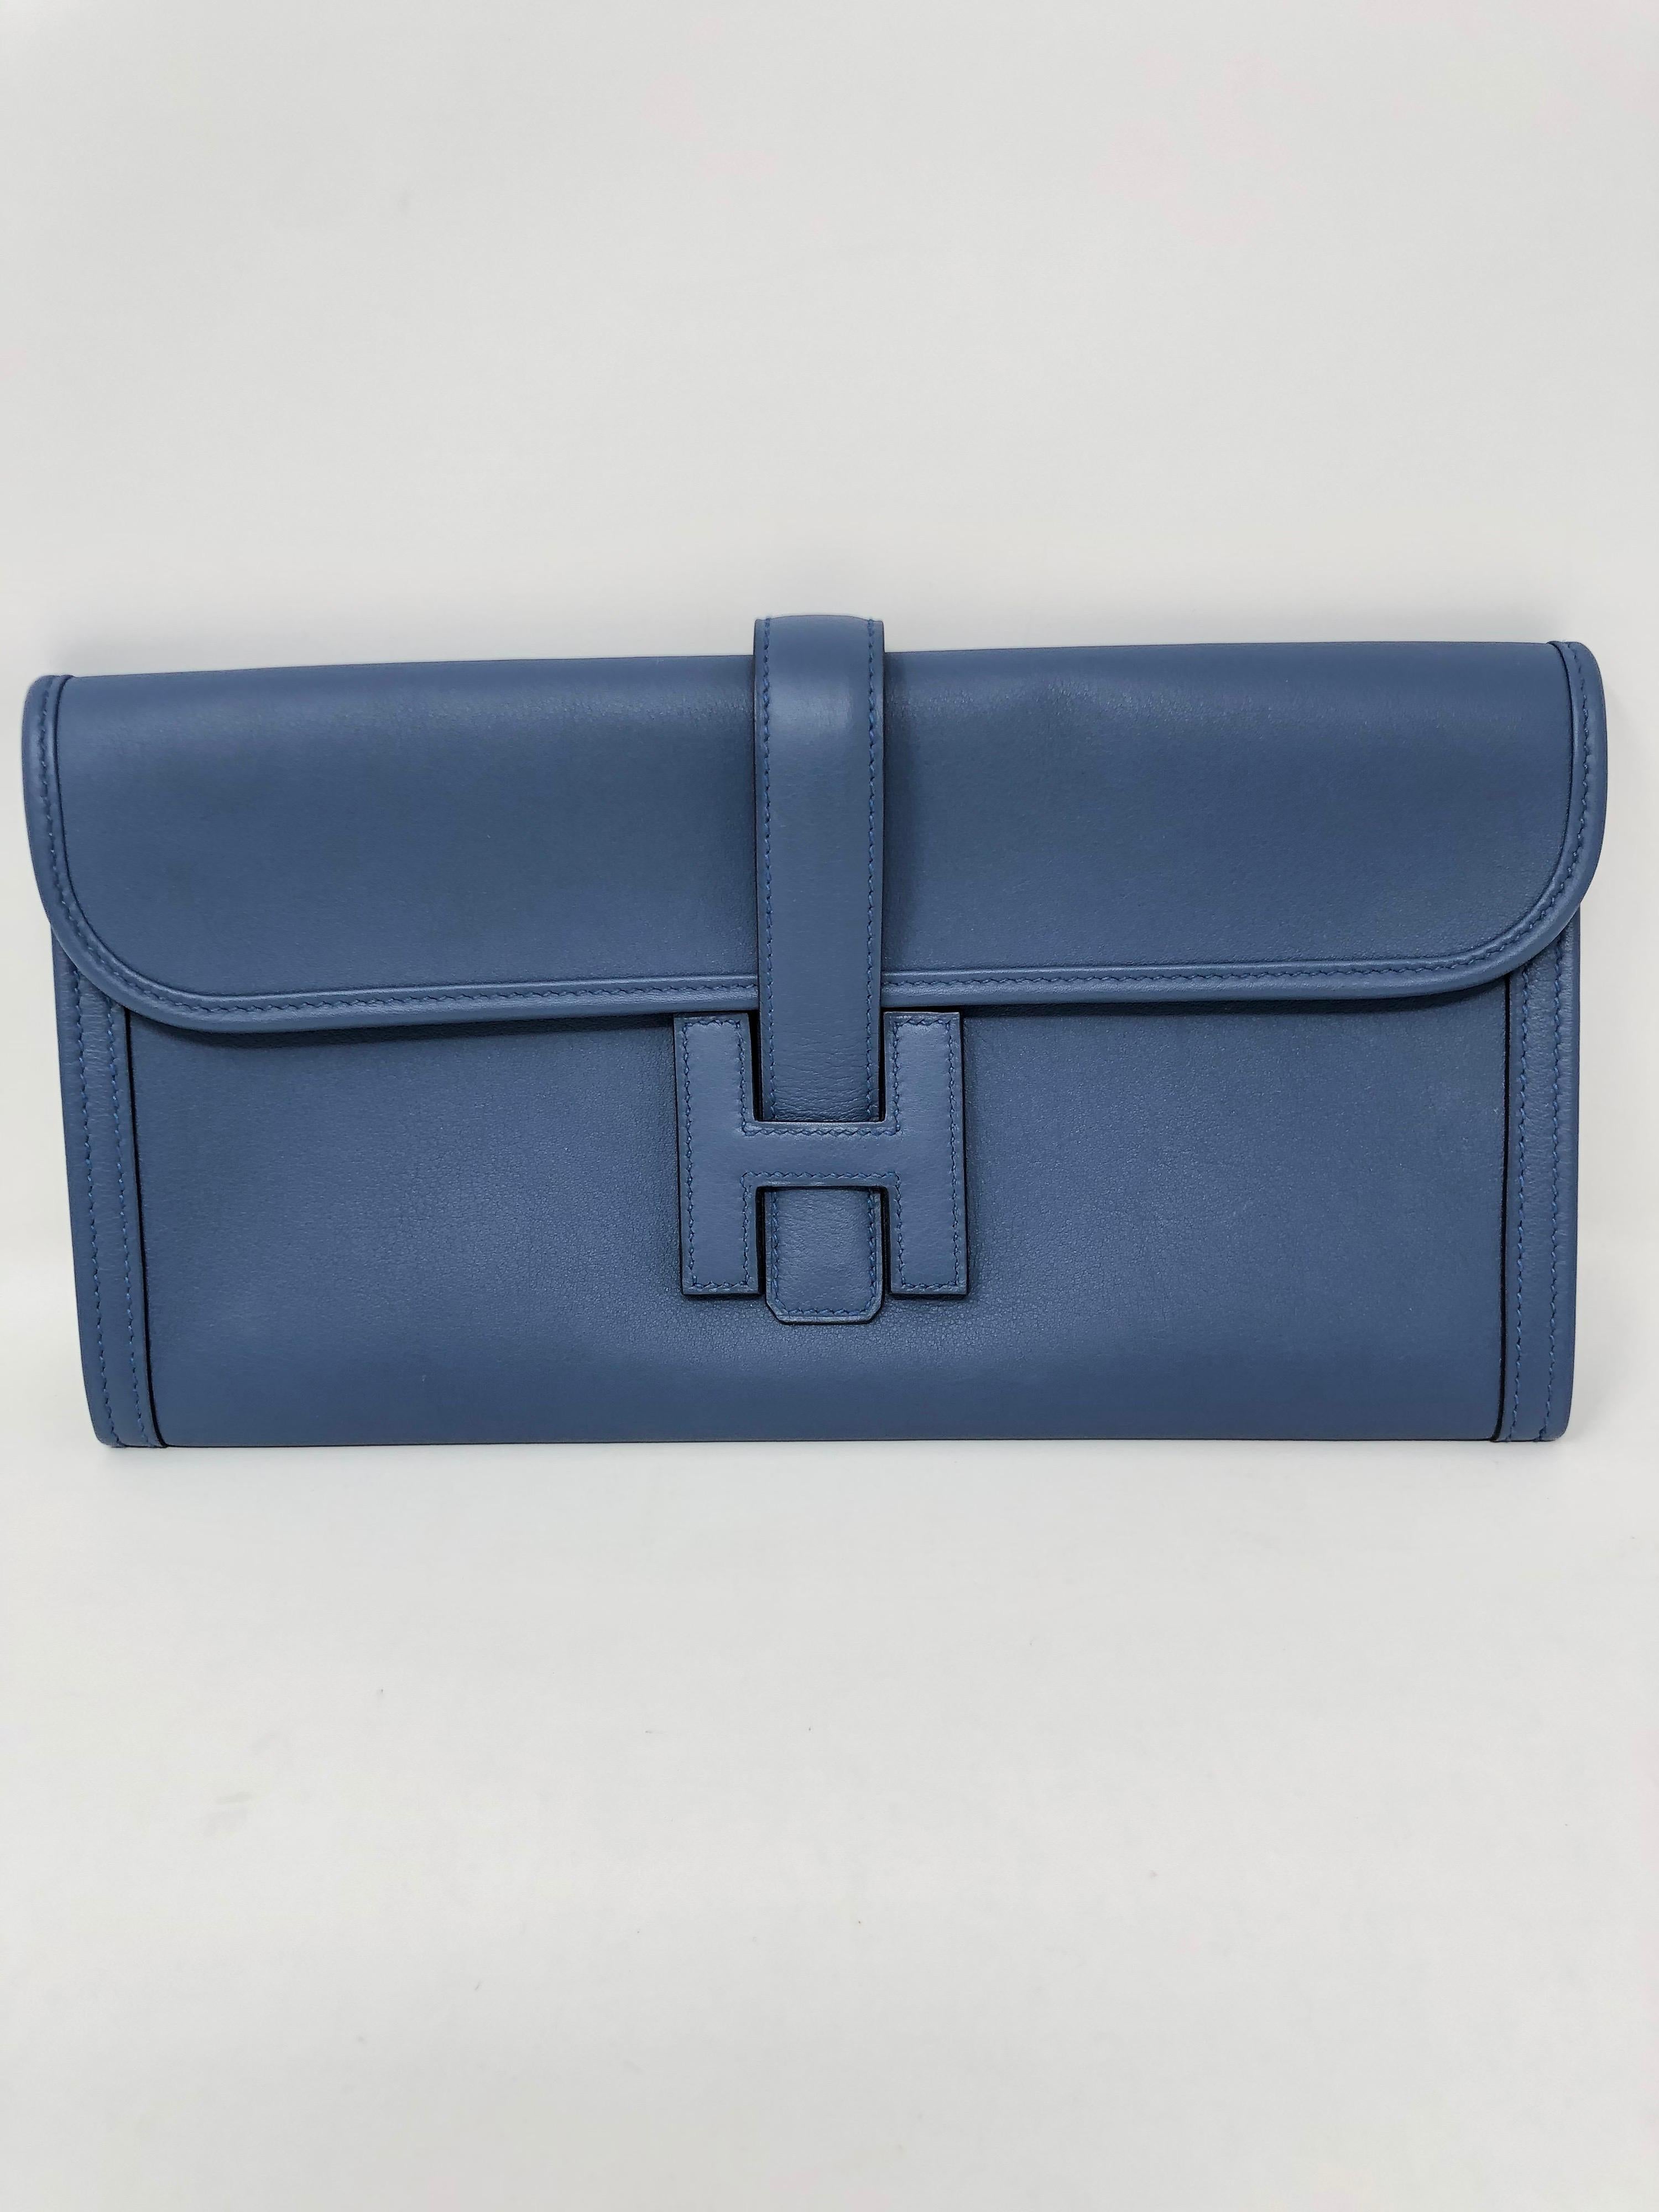 Hermes Blue Jige Clutch. Excellent condition like new. Beautiful light blue color. Hard to find color. A classic Hermes staple. Don't miss out. Guaranteed authentic. 